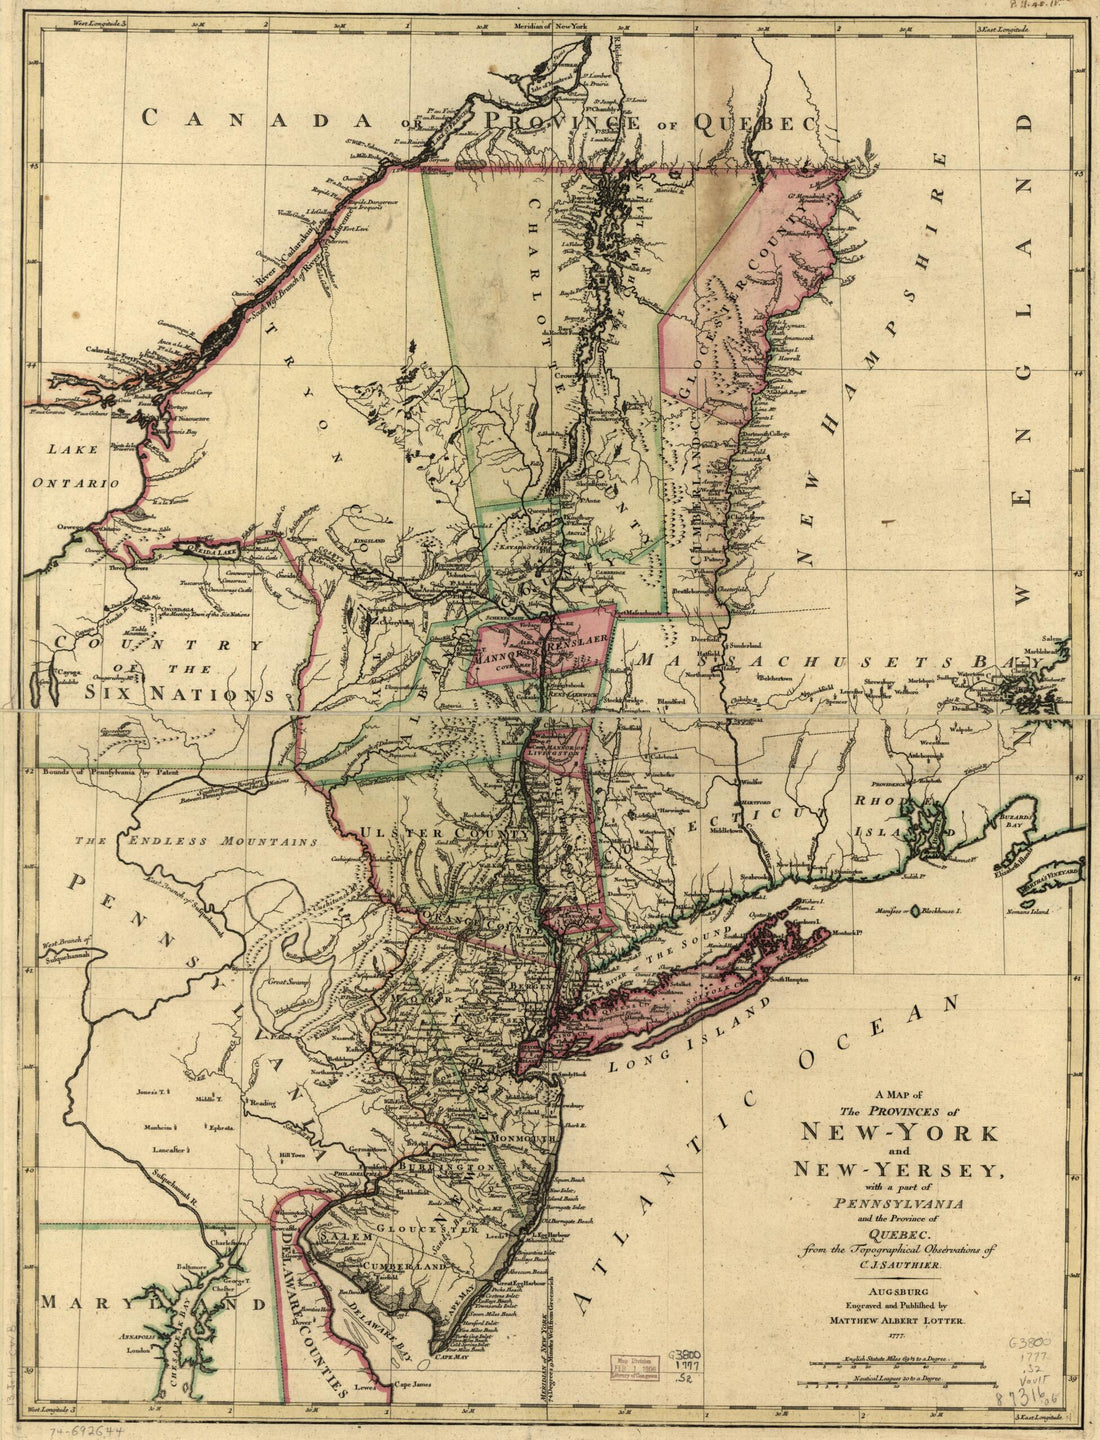 This old map of York and New-Yersey, With a Part of Pennsylvania and the Province of Quebec from 1777 was created by Matthäus Albrecht Lotter, Claude Joseph Sauthier in 1777